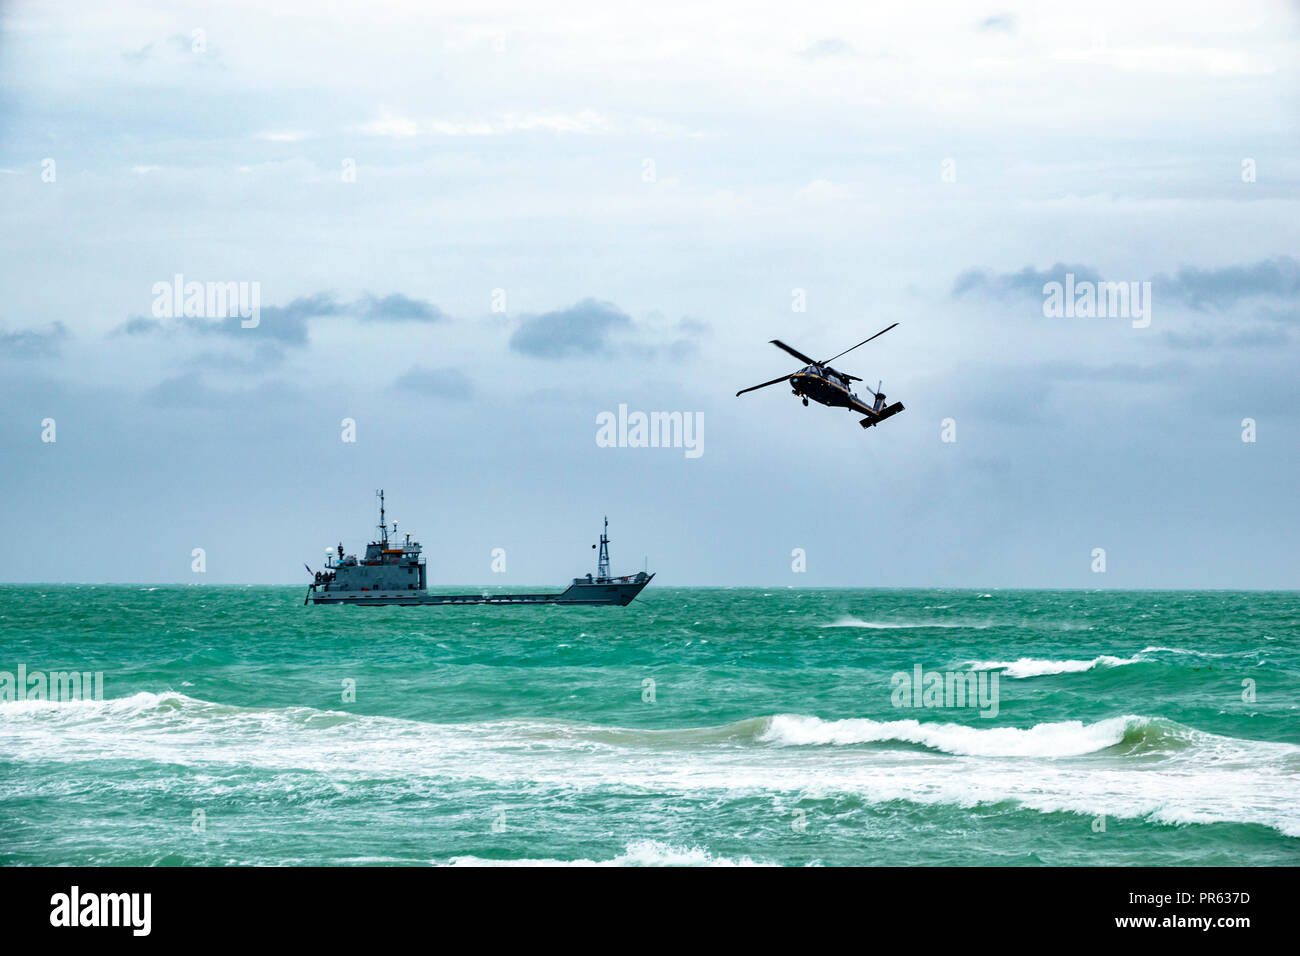 Miami Beach Florida,National Salute to America's Heroes Air & Sea Show,Sikorsky MH-60G/HH-60G Pave Hawk twin-turboshaft engine helicopter,Atlantic Oce Stock Photo